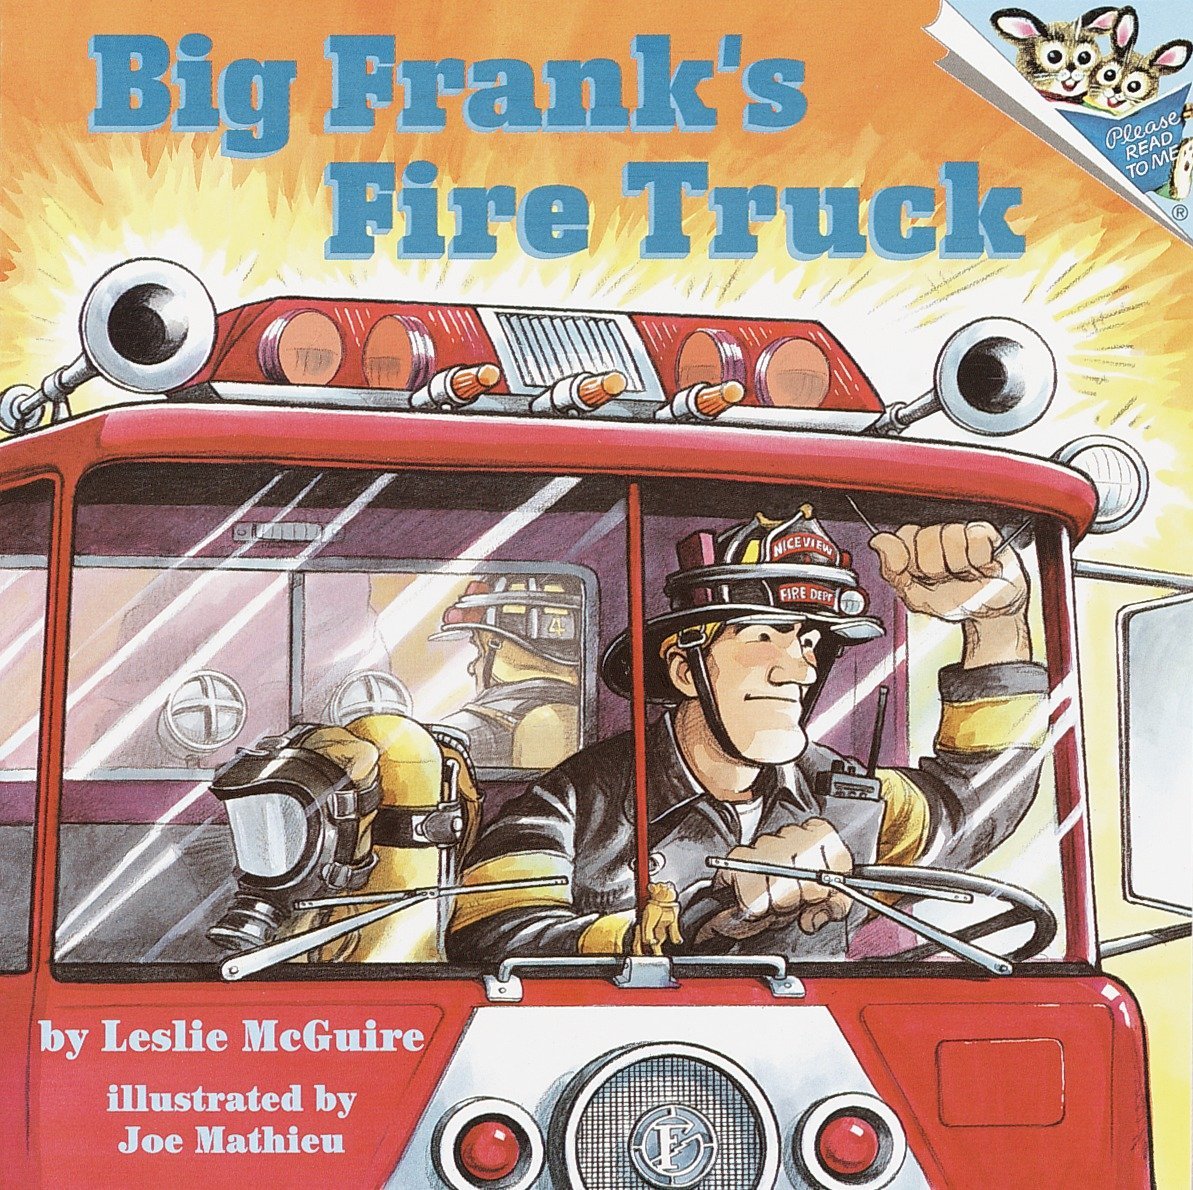 speech and language teaching concepts for big frank's fire truck in speech therapy